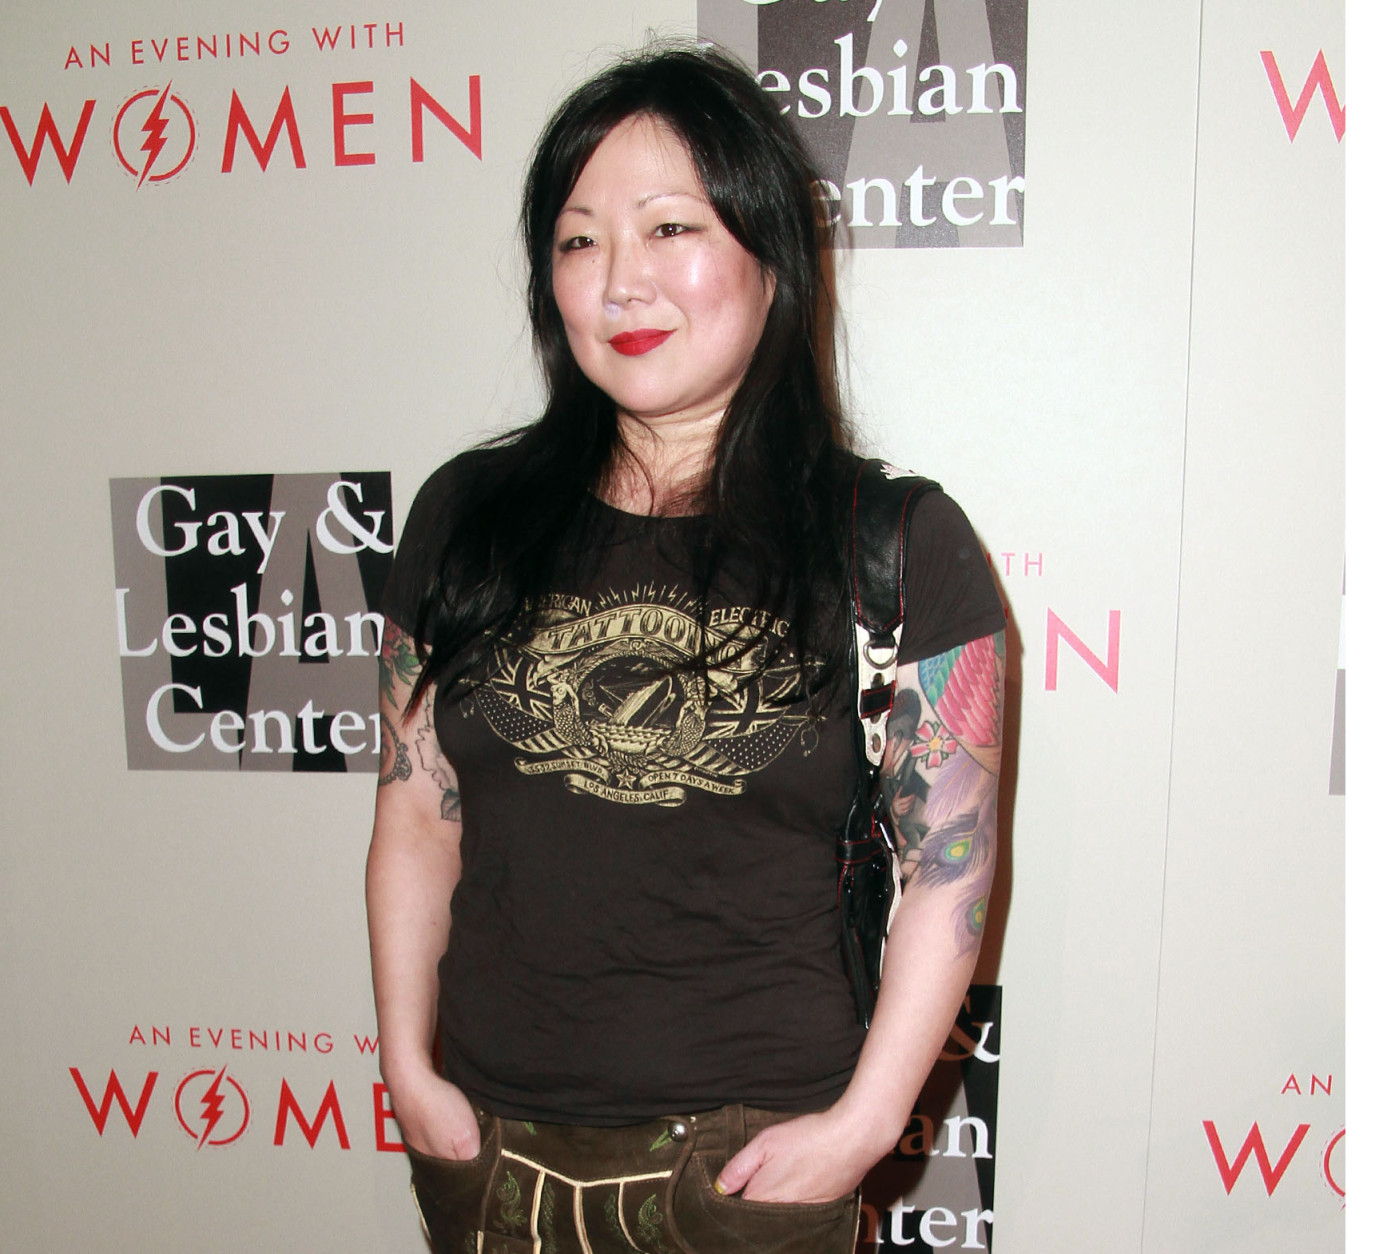 FILE - In this May 10, 2014 file photo, Margaret Cho arrives at The L.A. Gay and Lesbian Center's Annual "An Evening With Women," at The Beverly Hilton on Saturday, in Beverly Hills, Calif. TLC said Friday, Dec. 12, 2014, that its first late-night talk show, "All About Sex," will include rotating segments such as the week's "craziest" sex-related news. "All About Sex" will be co-hosted by the comedian Cho; writer Heather McDonald; actress Marissa Jaret Winokur, and sex and relationship expert Tiffanie Davis Henry. (Photo by Theresa Bouche/Invision/AP, File)